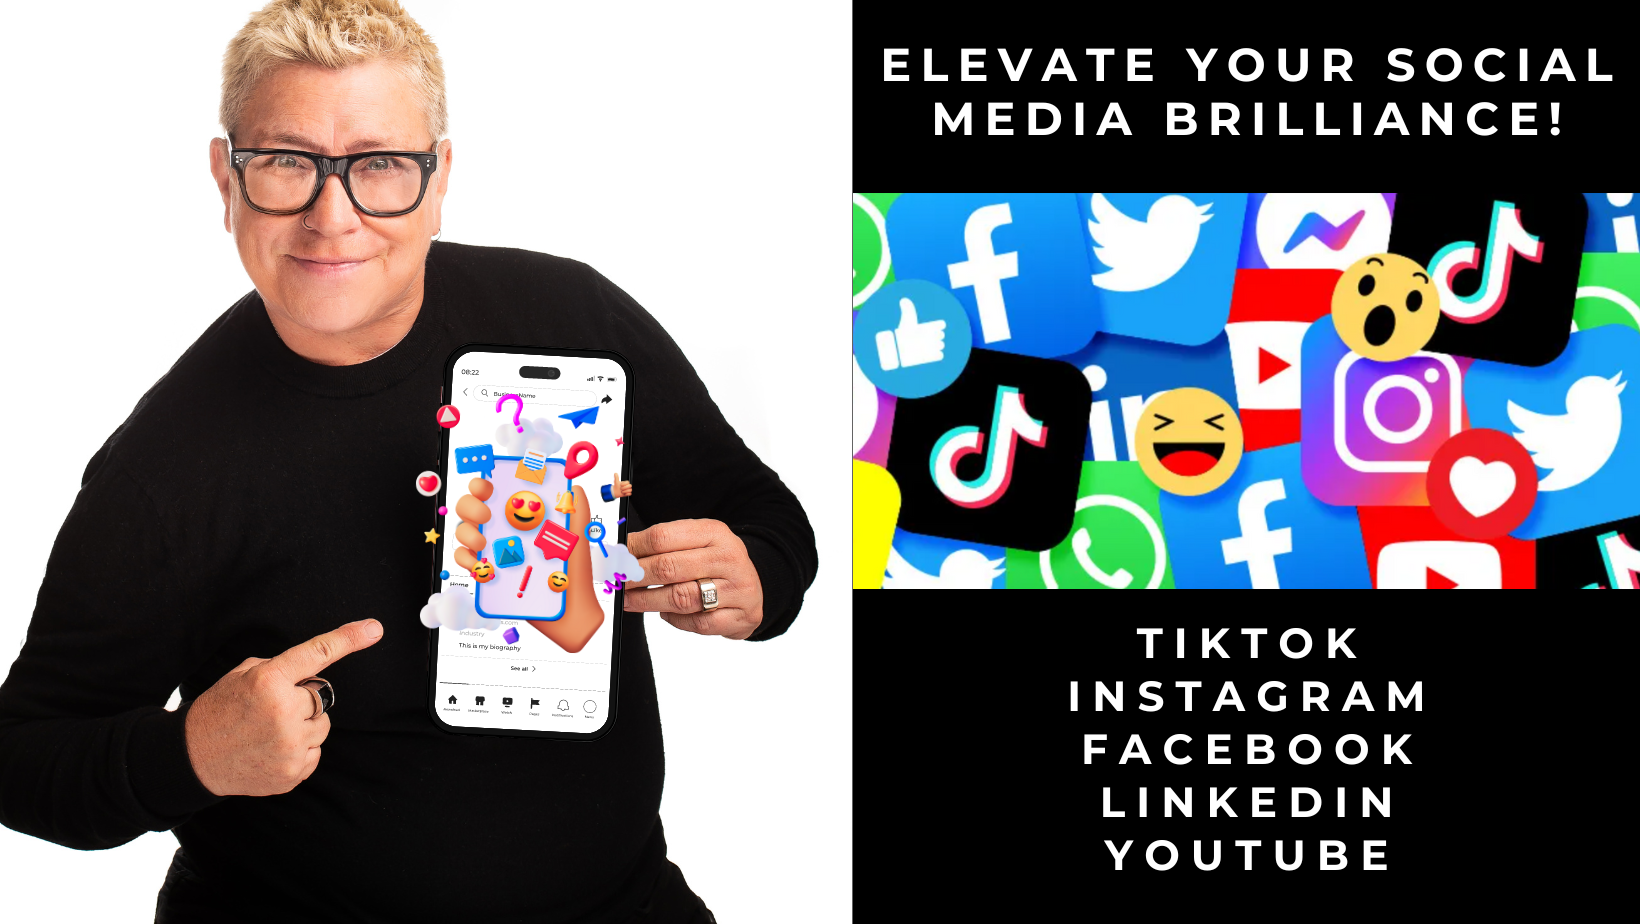 Elevate Your Social Media